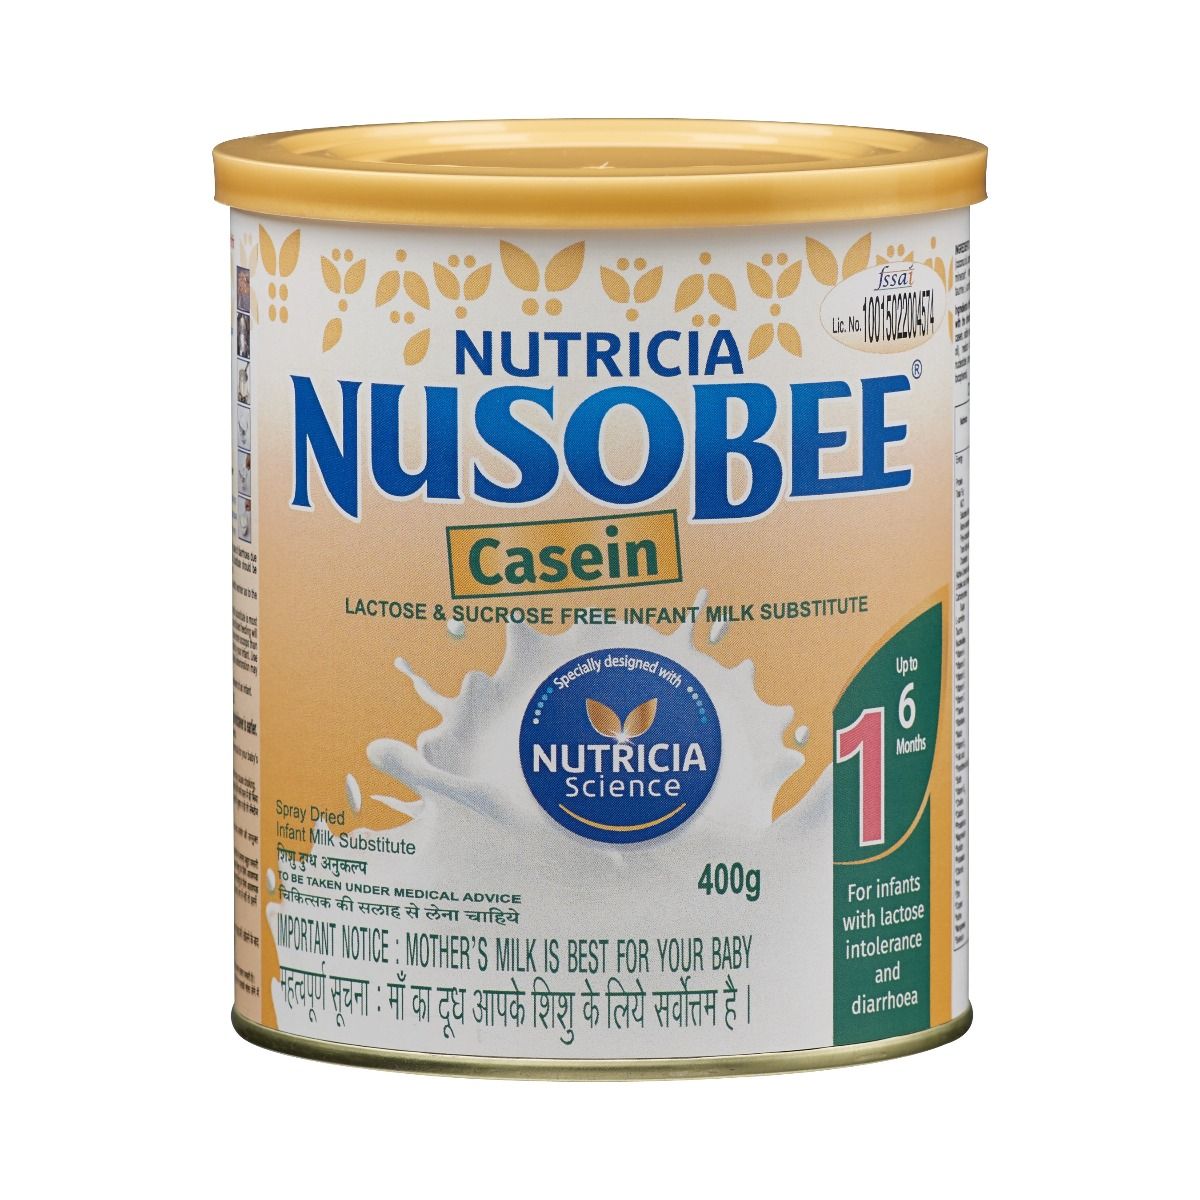 Buy Nutrica Nusobee Casein Infant Formula, Stage 1, Up to 6 Months, 400 gm Tin Online